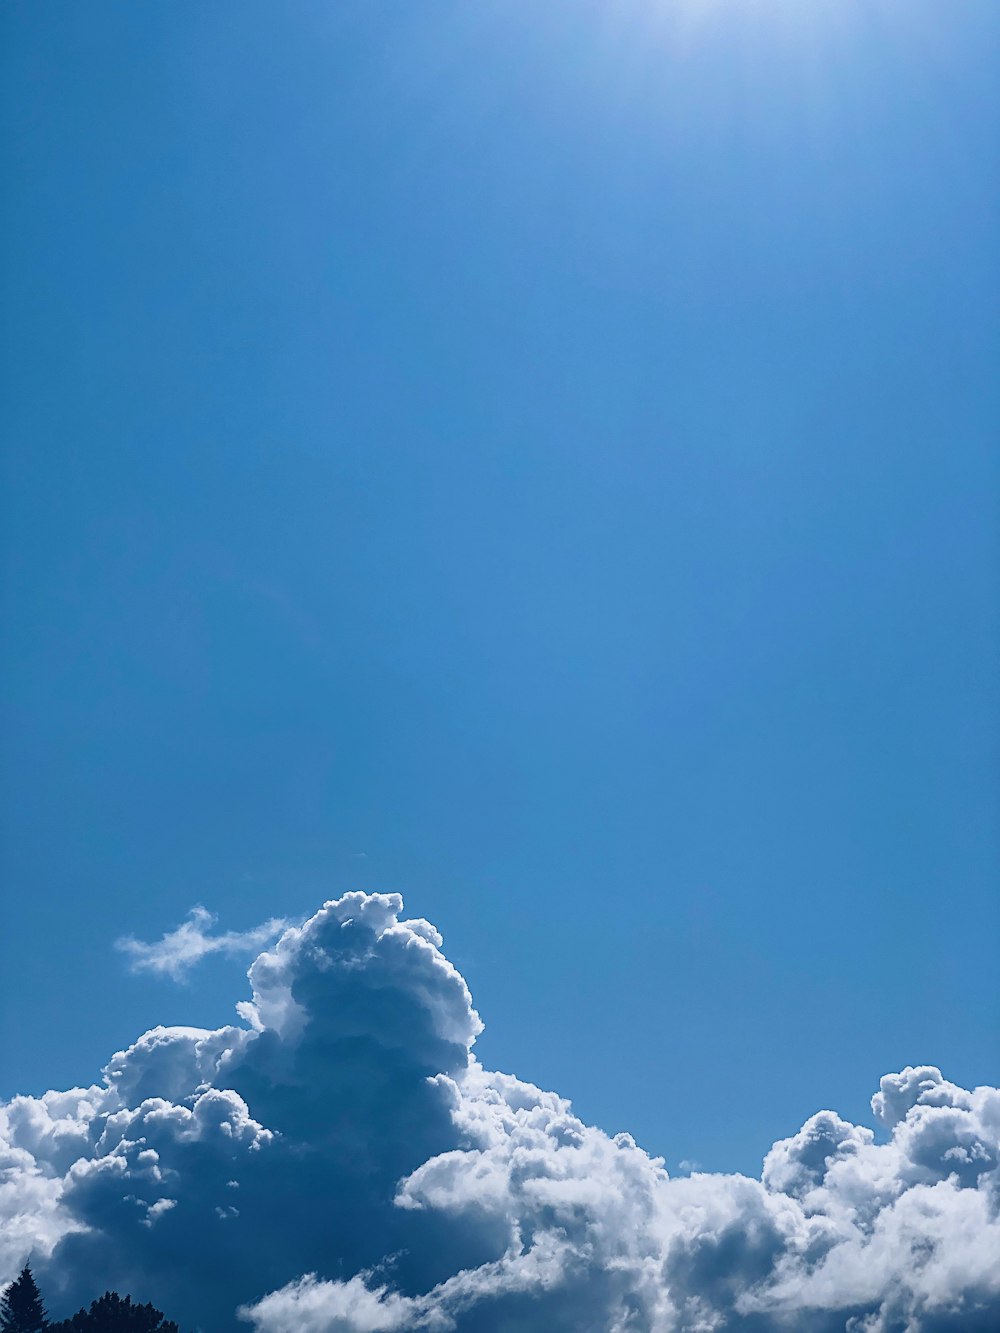 750+ Blue Sky With Cloud Pictures | Download Free Images on Unsplash